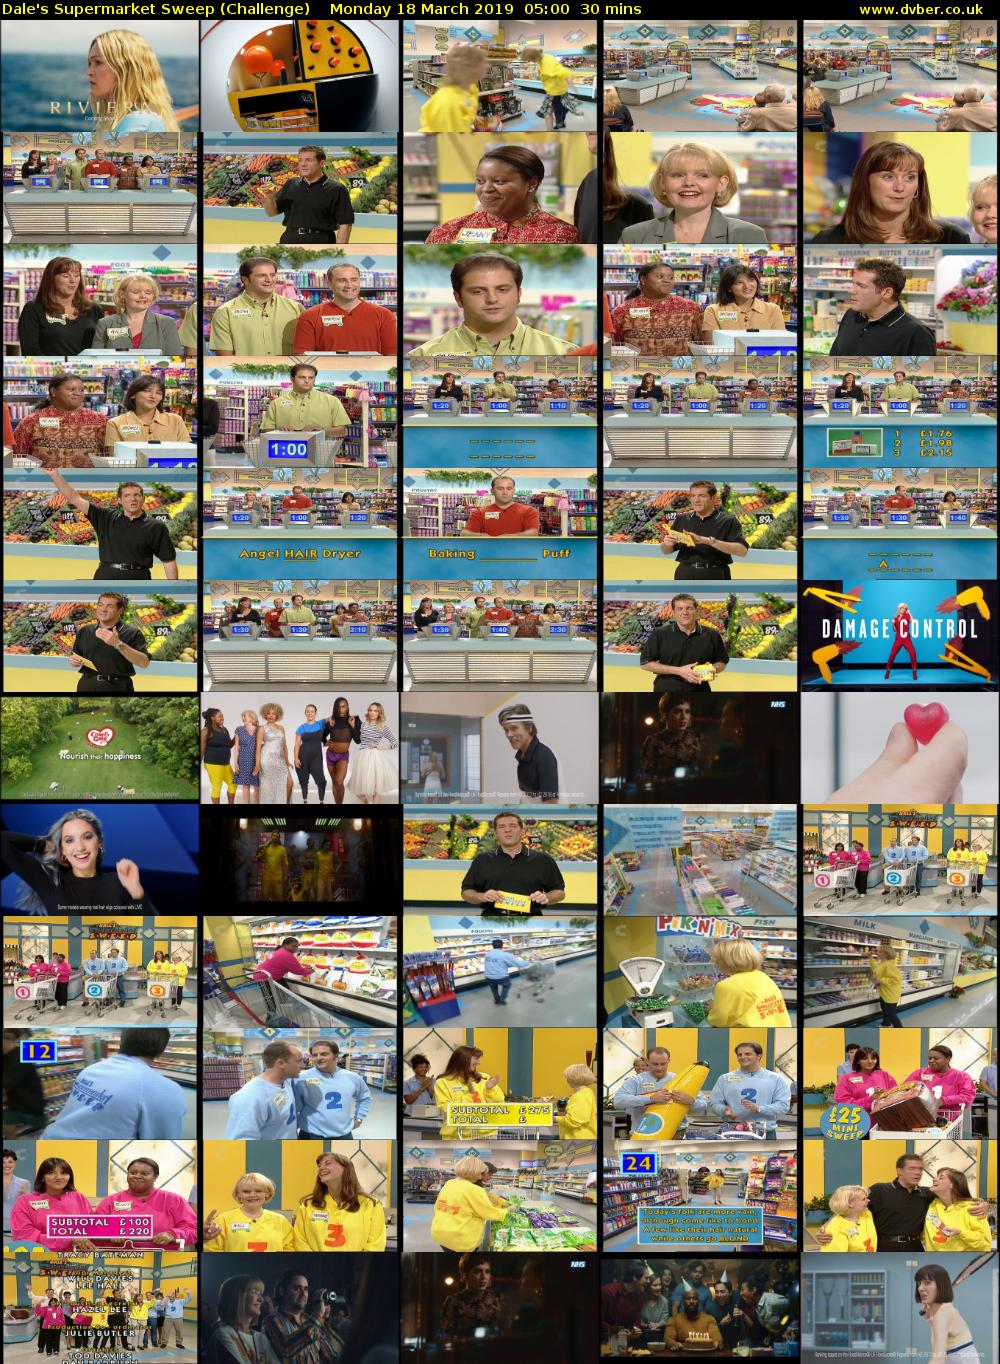 Dale's Supermarket Sweep (Challenge) Monday 18 March 2019 05:00 - 05:30